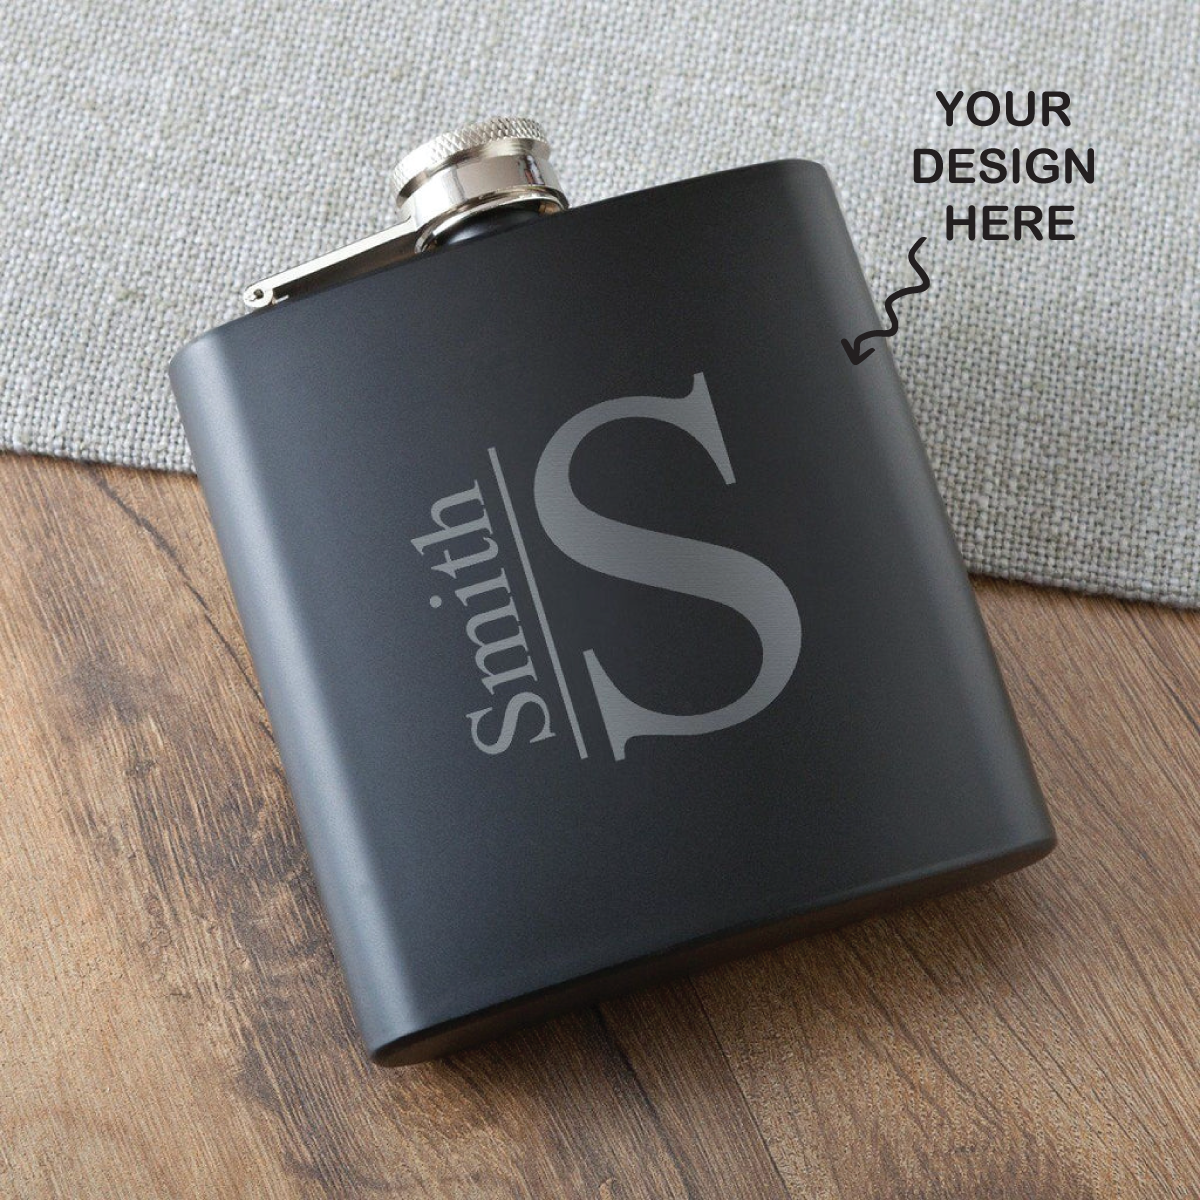 Personalized Black Stainless Steel Hip Flask - For Return Gift, Corporate Gifting, Office or Personal Use